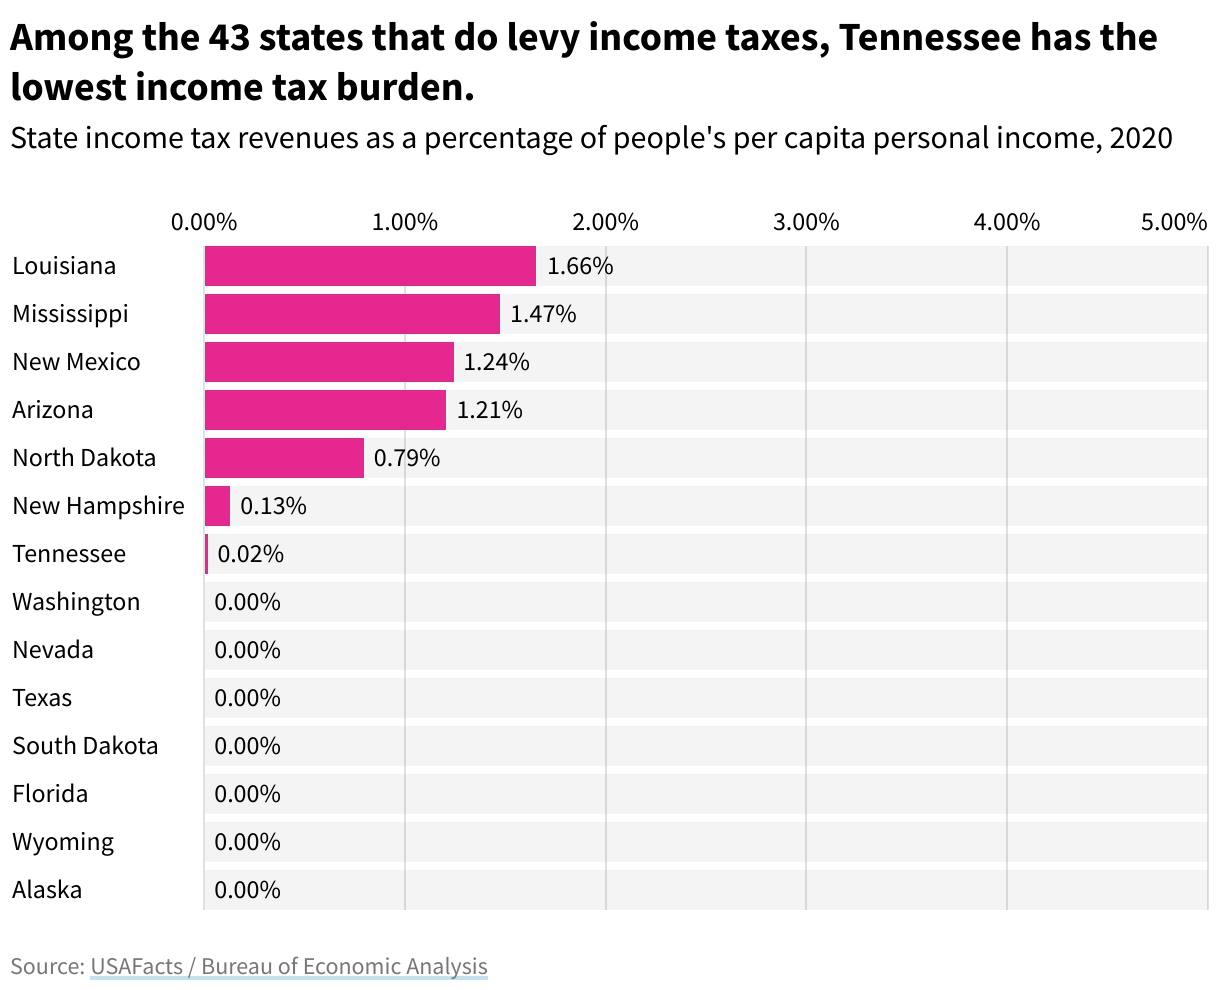 Horizontal bar chart showing State income tax revenues as a percentage of people's per capita personal income, 2020. Among the 43 states that do levy income taxes, Tennessee has the lowest income tax burden.